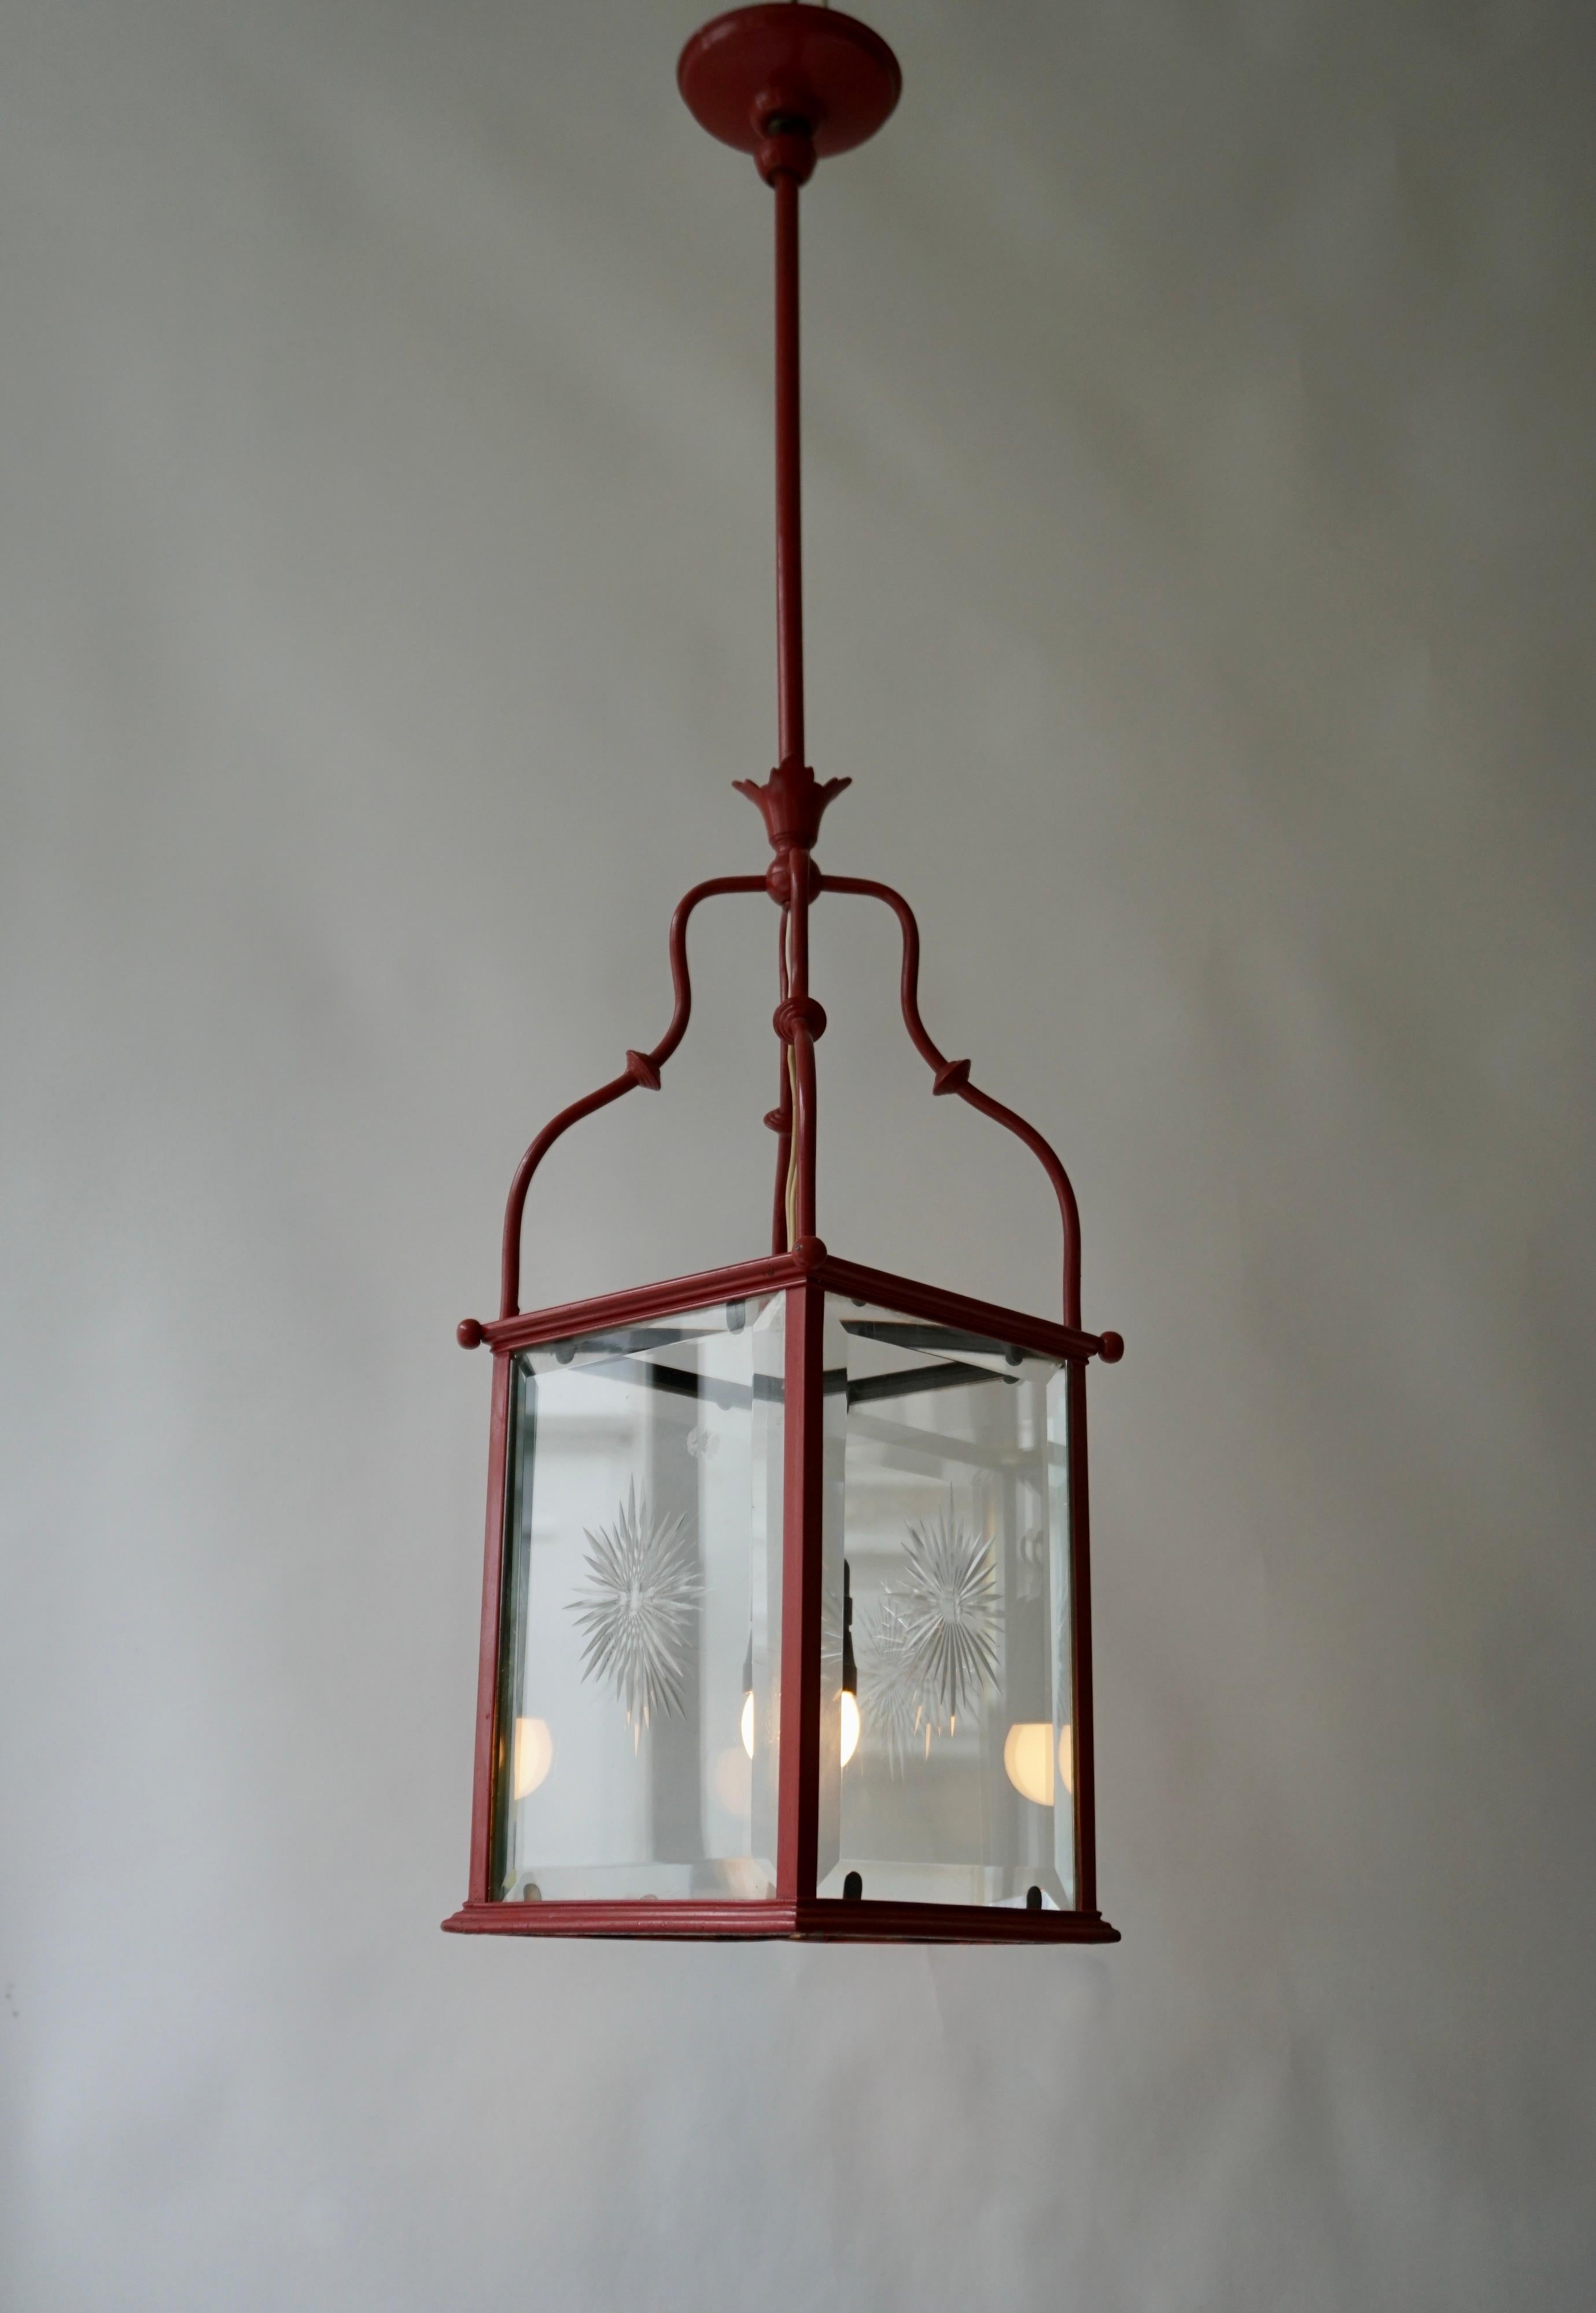 An Italian red tôle lantern from the early 20th century. This antique lantern from Italy has a cut glass with a cut star motif in the middle.Note that the wiring is older, and may need to be rewired to modern standards.

Height 96 cm - 38